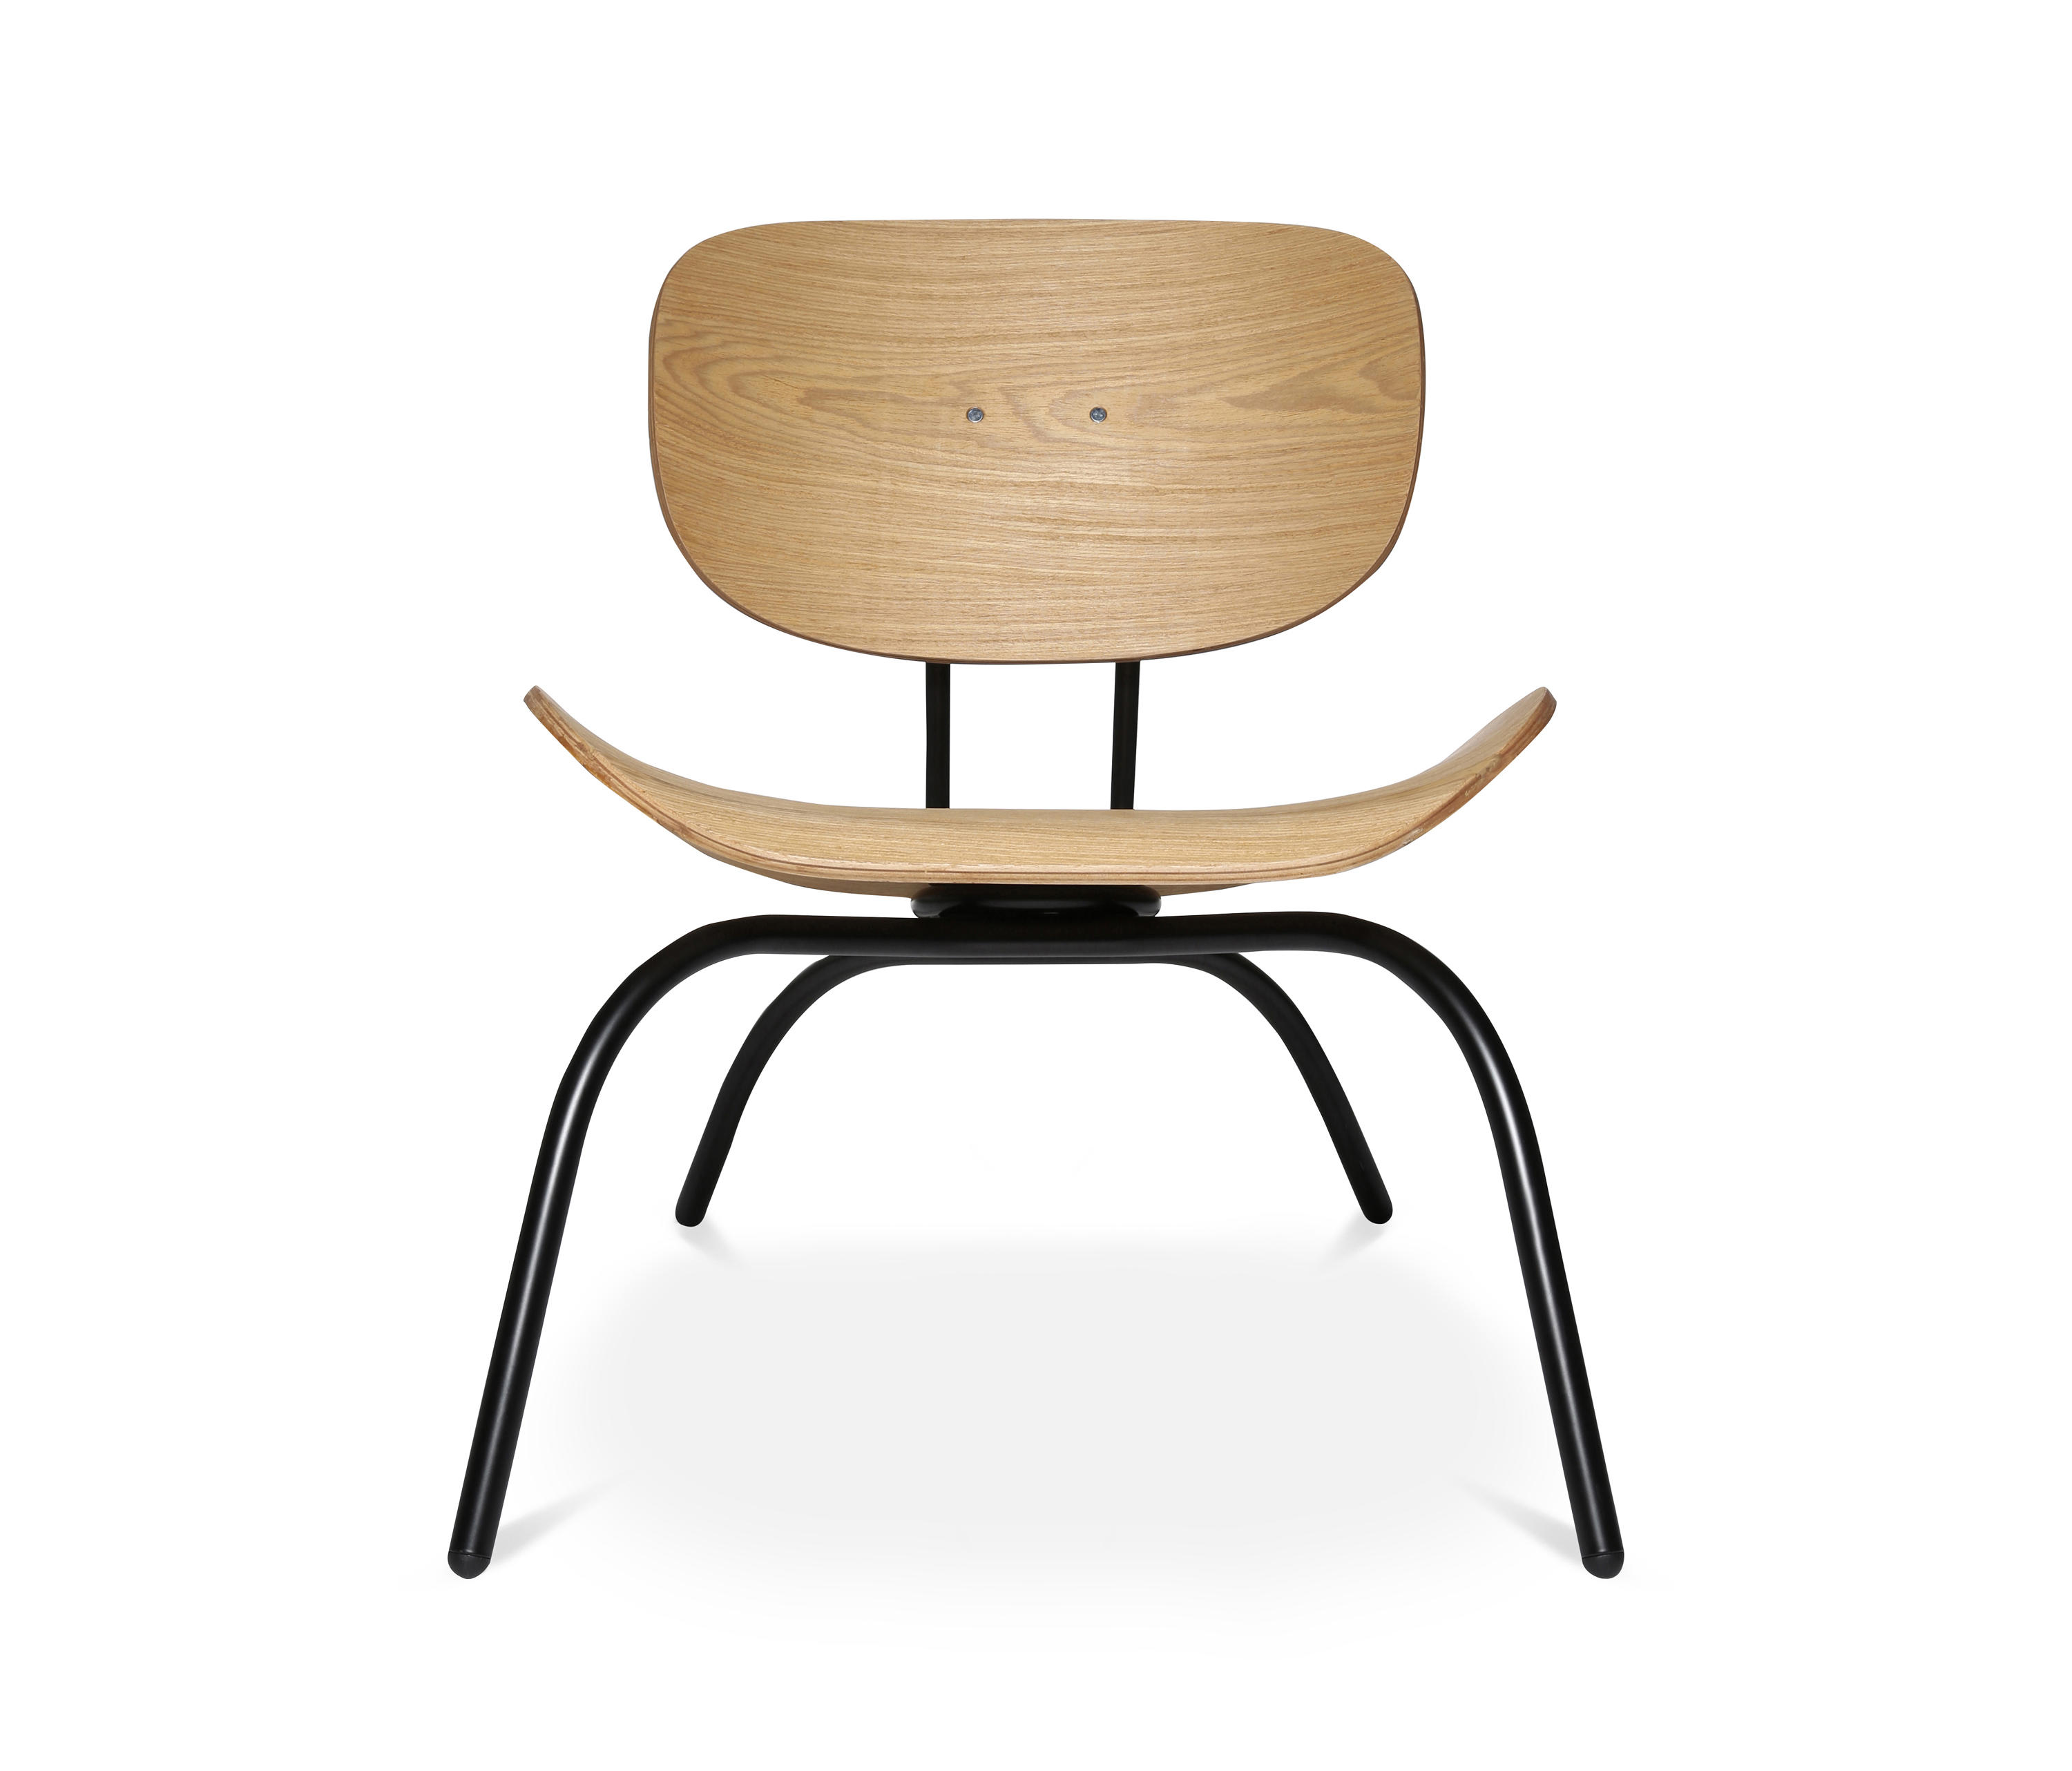 W-1970 Chair by Florian Kienast for Wagner